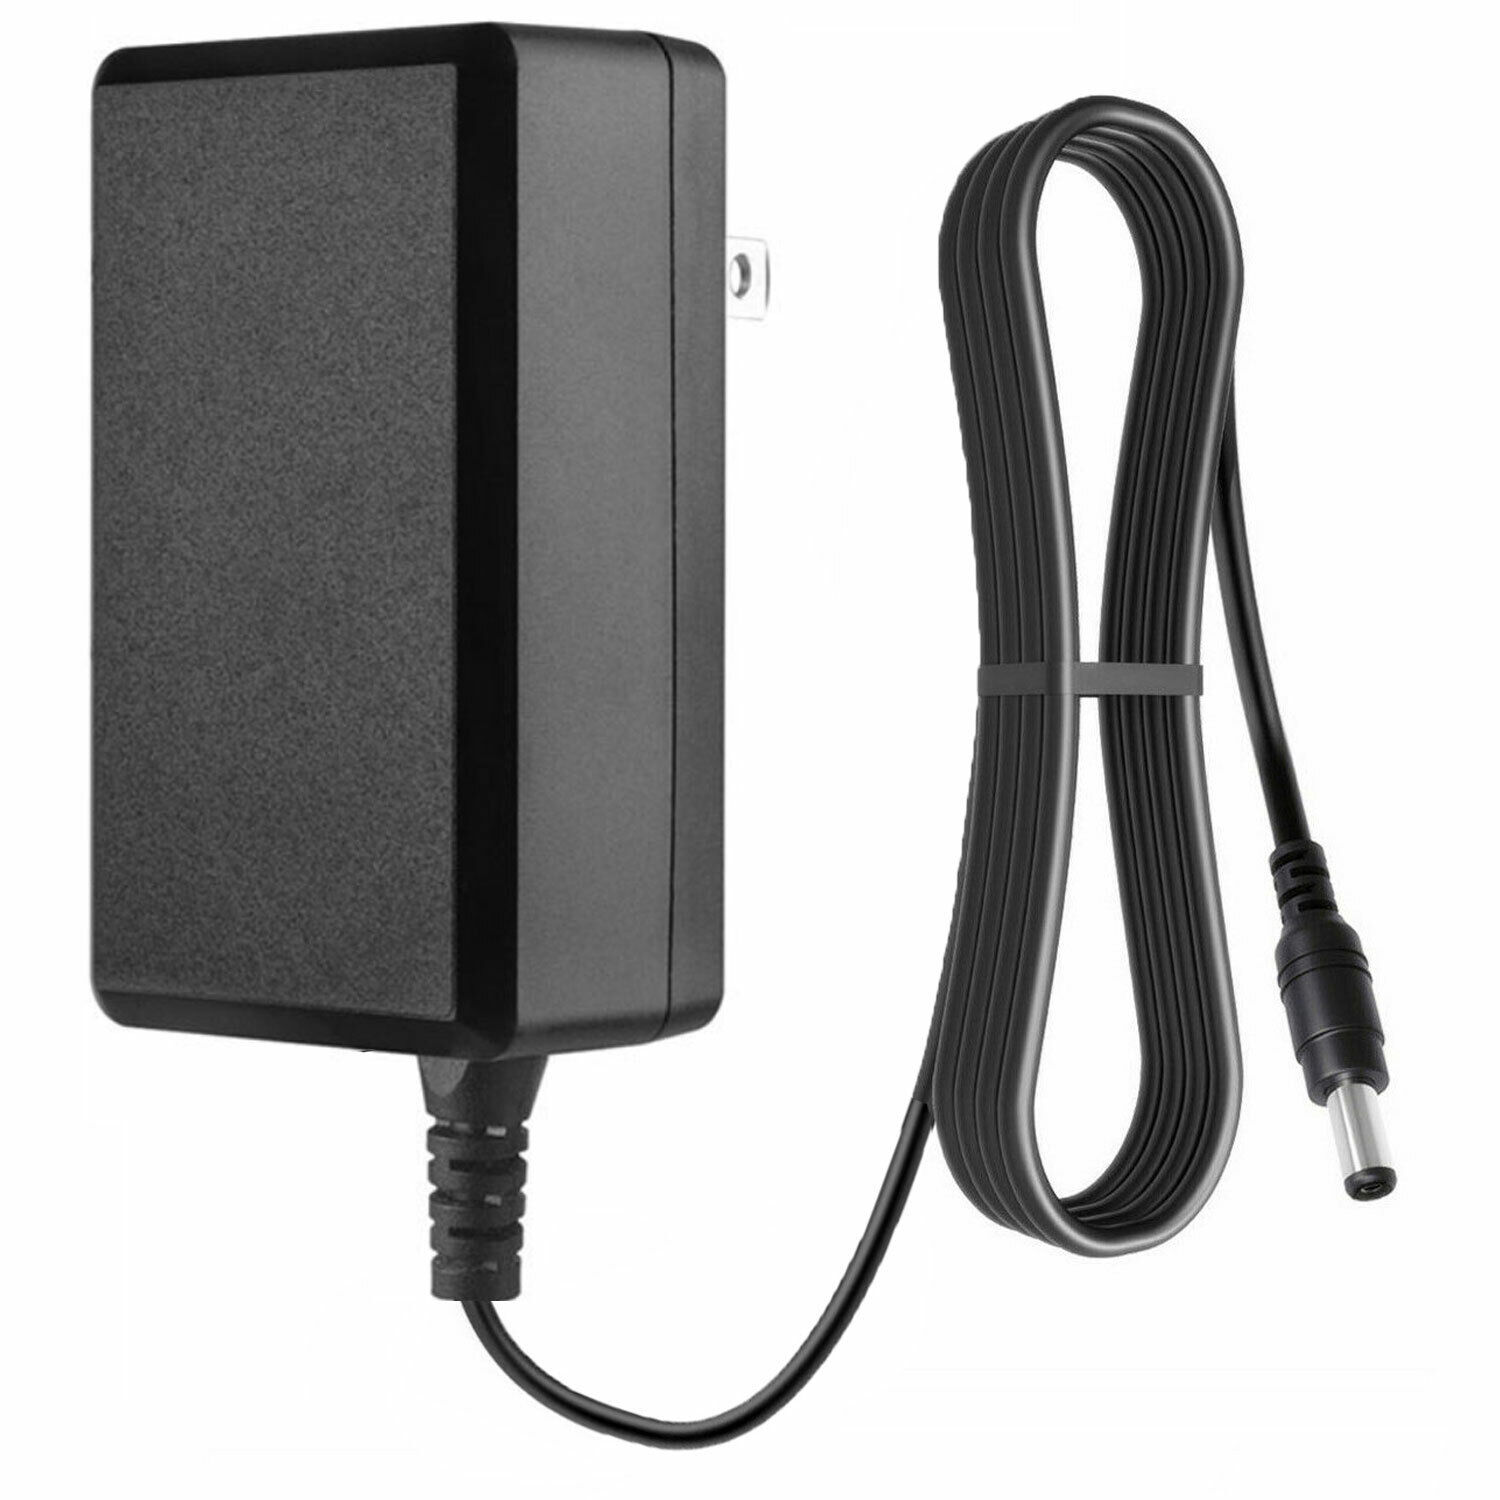 8.5V AC Adapter For CM-07 CM07 CM-7 CM7 Pure-Wave By PADO Massager Power Supply AC Adapter for 8.5V AC Adapter For CM